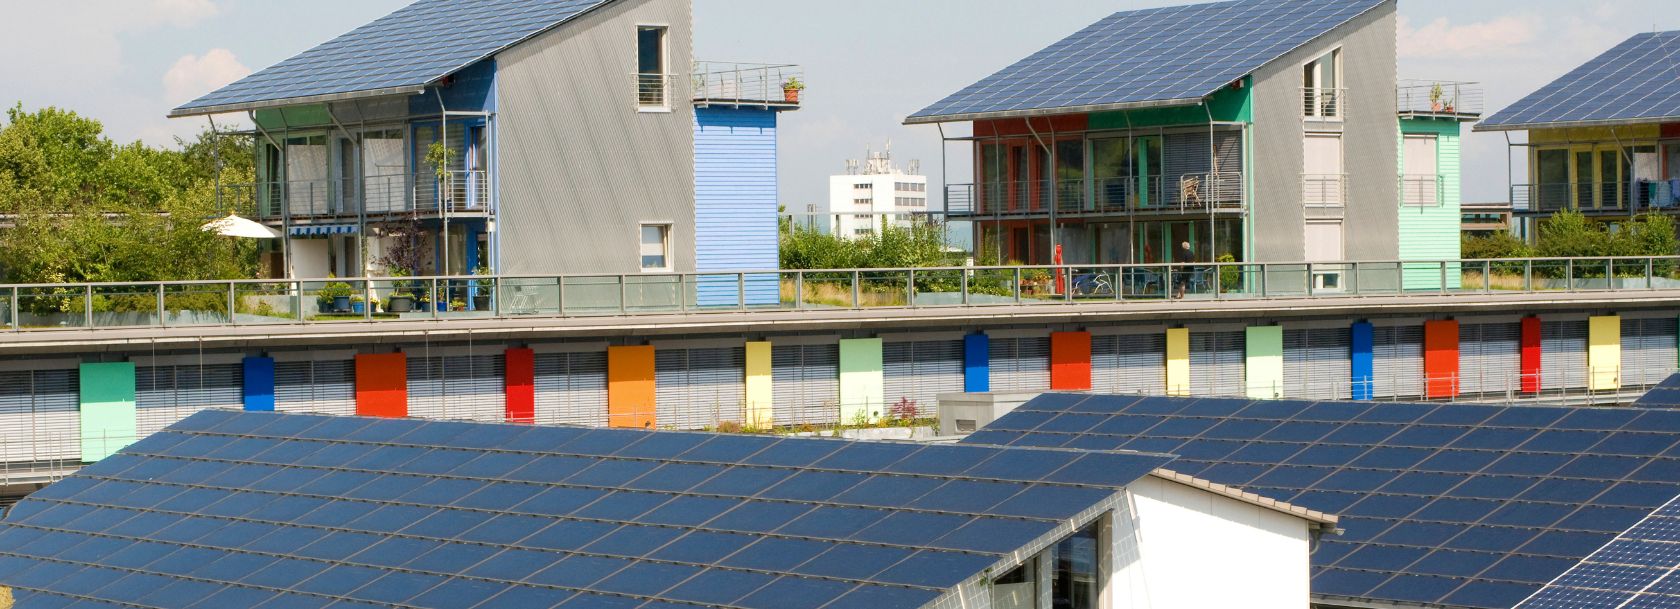 SOLAR VILLAGE, WITH PANELS COVERING HOUSE ROOFS